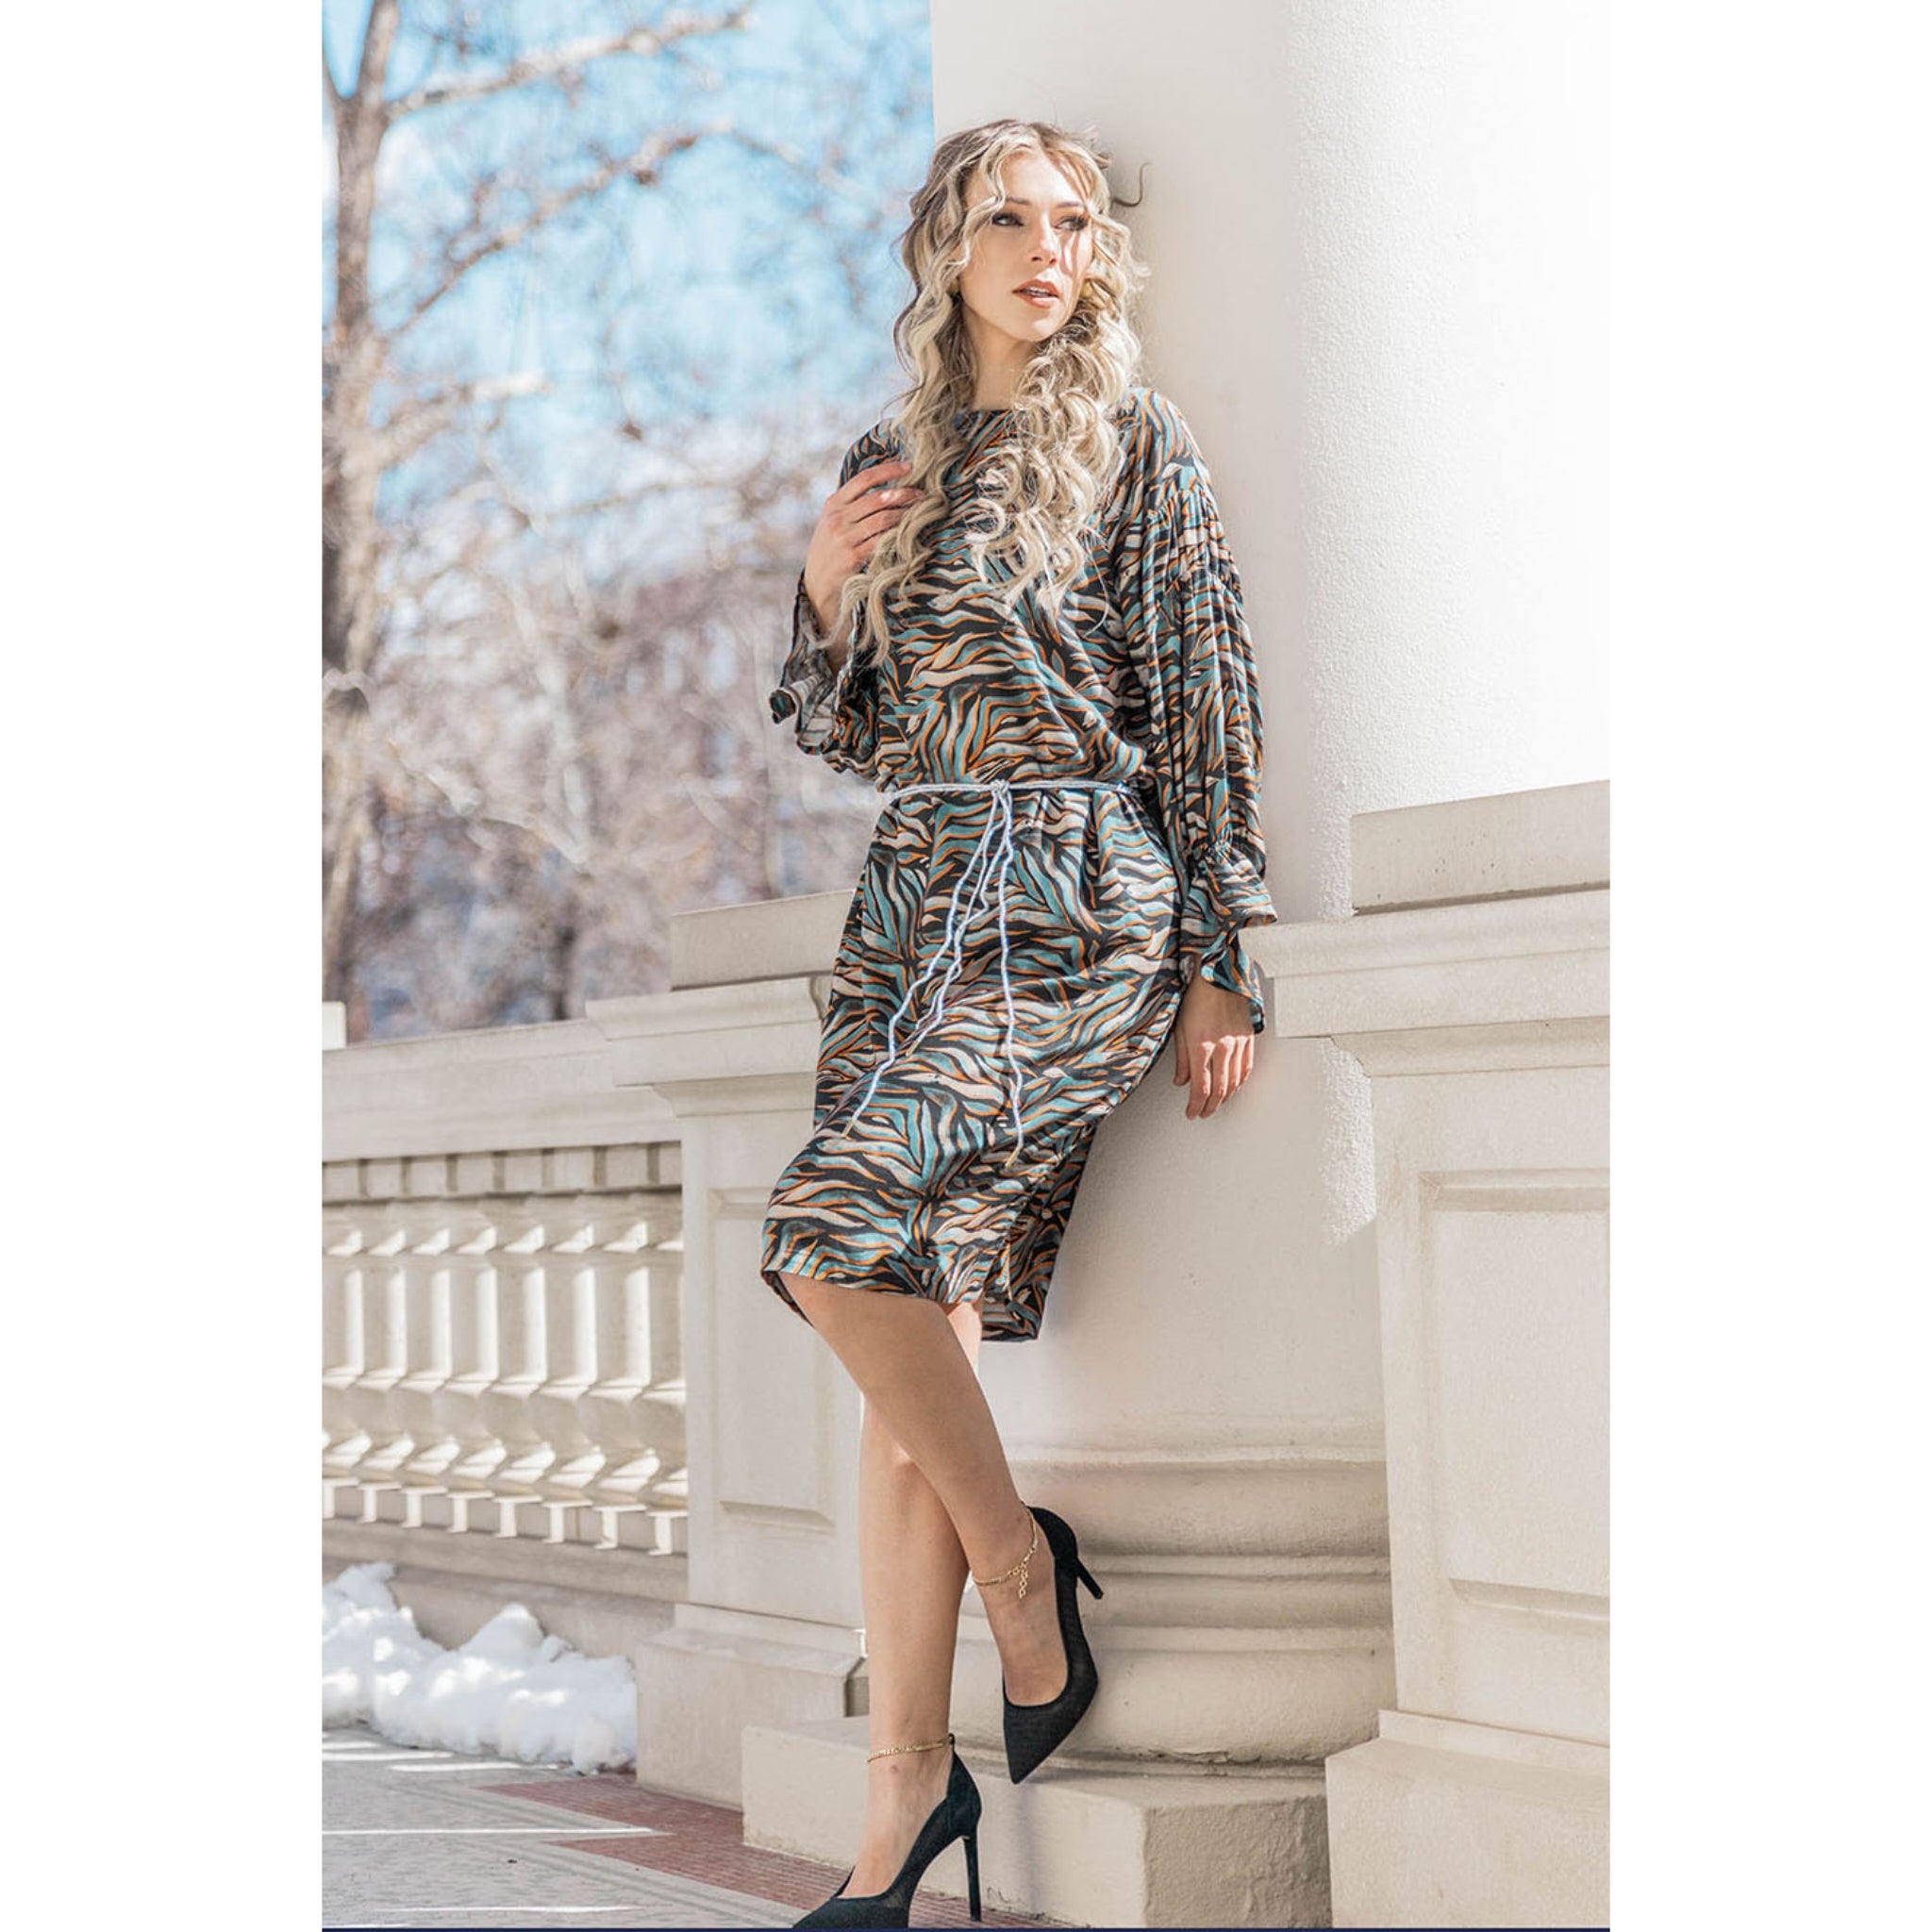 BLUM - Business formal with style. This clean straight-cut dress features  short sleeves and a boat neckline. A cinched waist that carves a flattering  silhouette. Featuring an attached waistband and lace trims